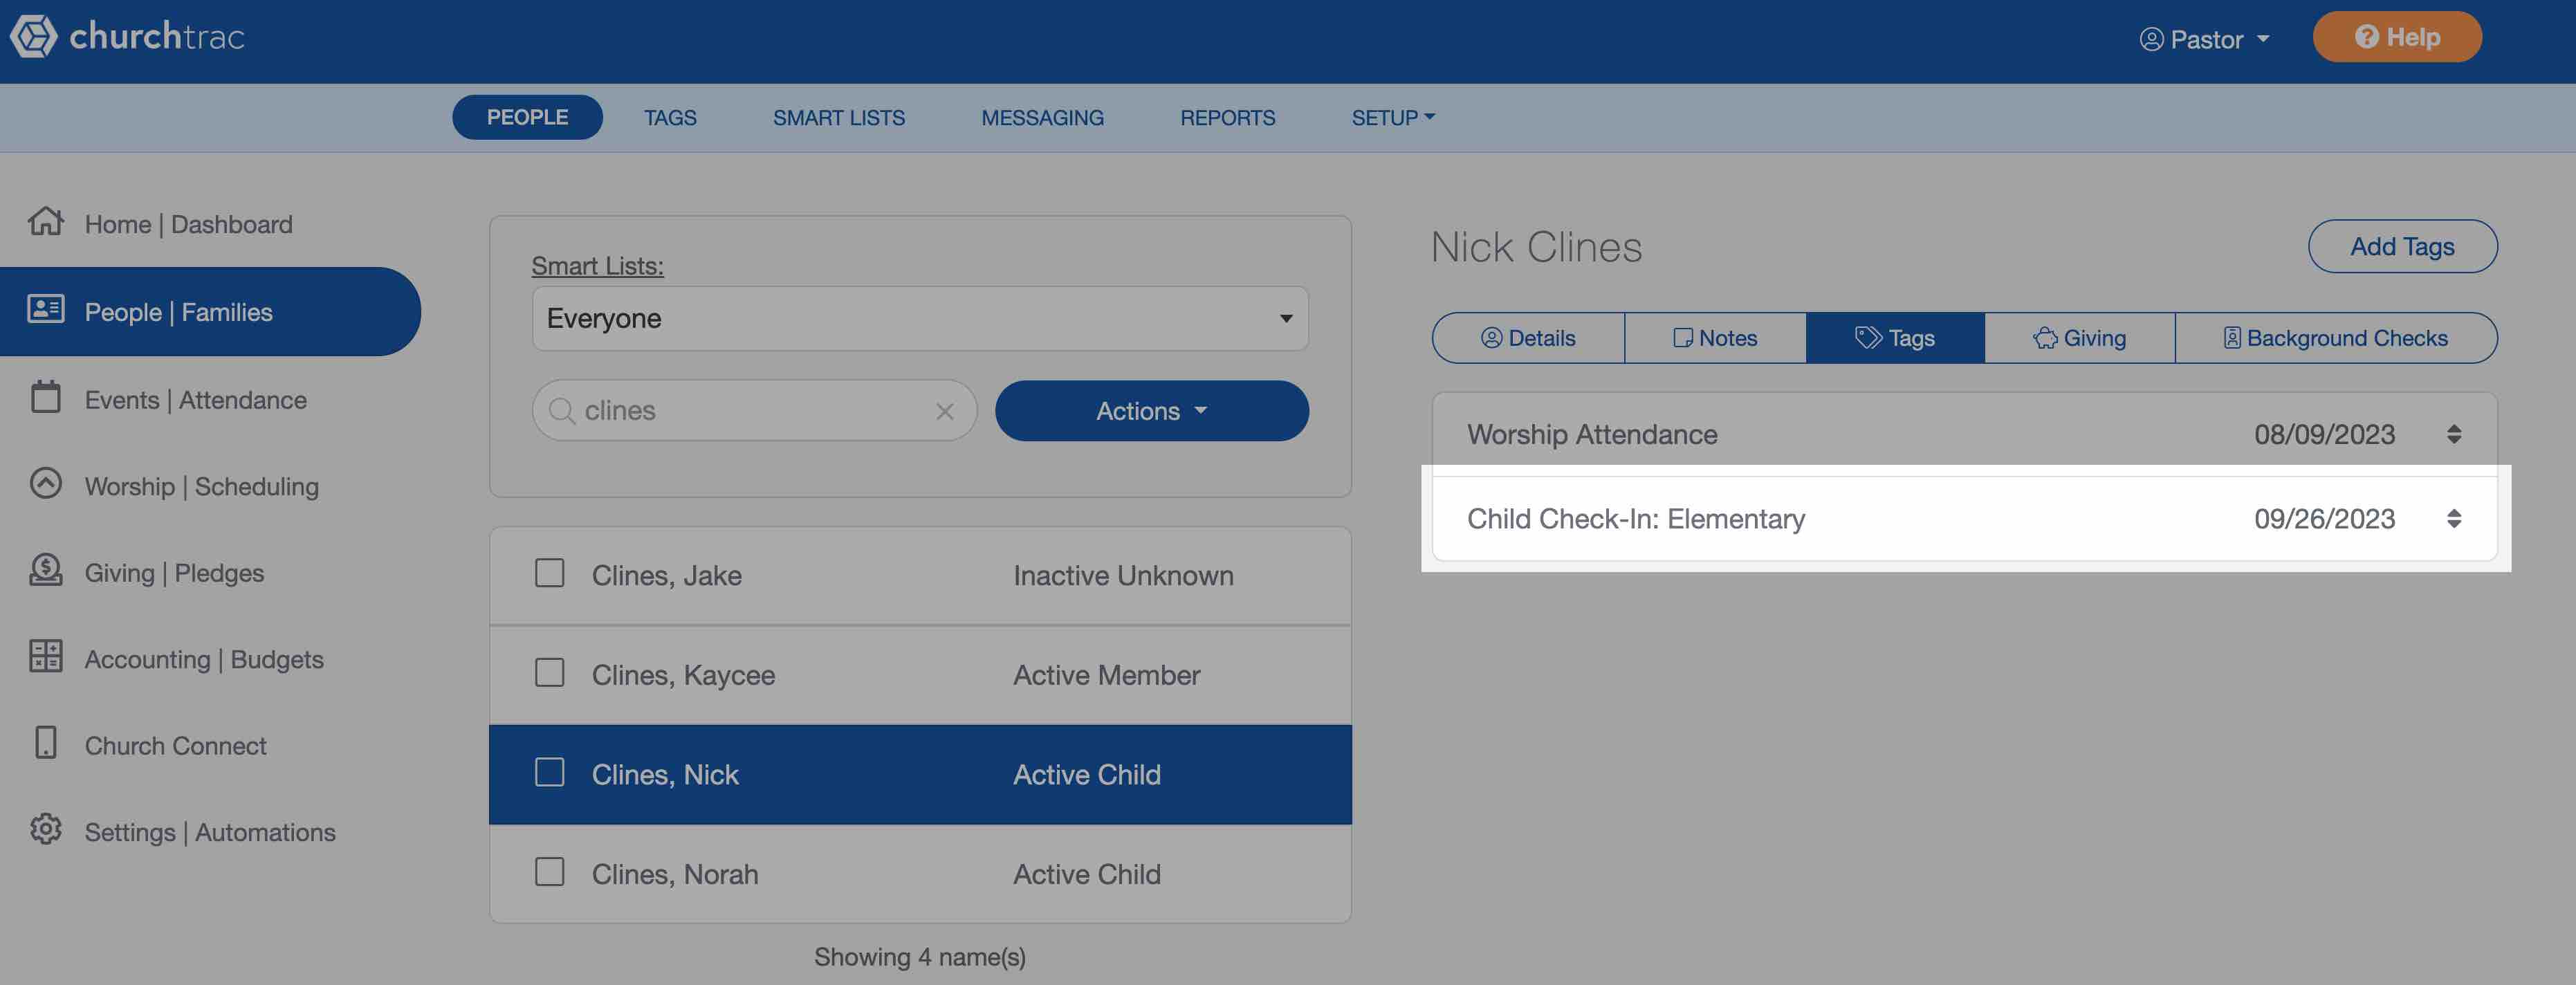 Tracking Church Attendance With Tags in the family check in system